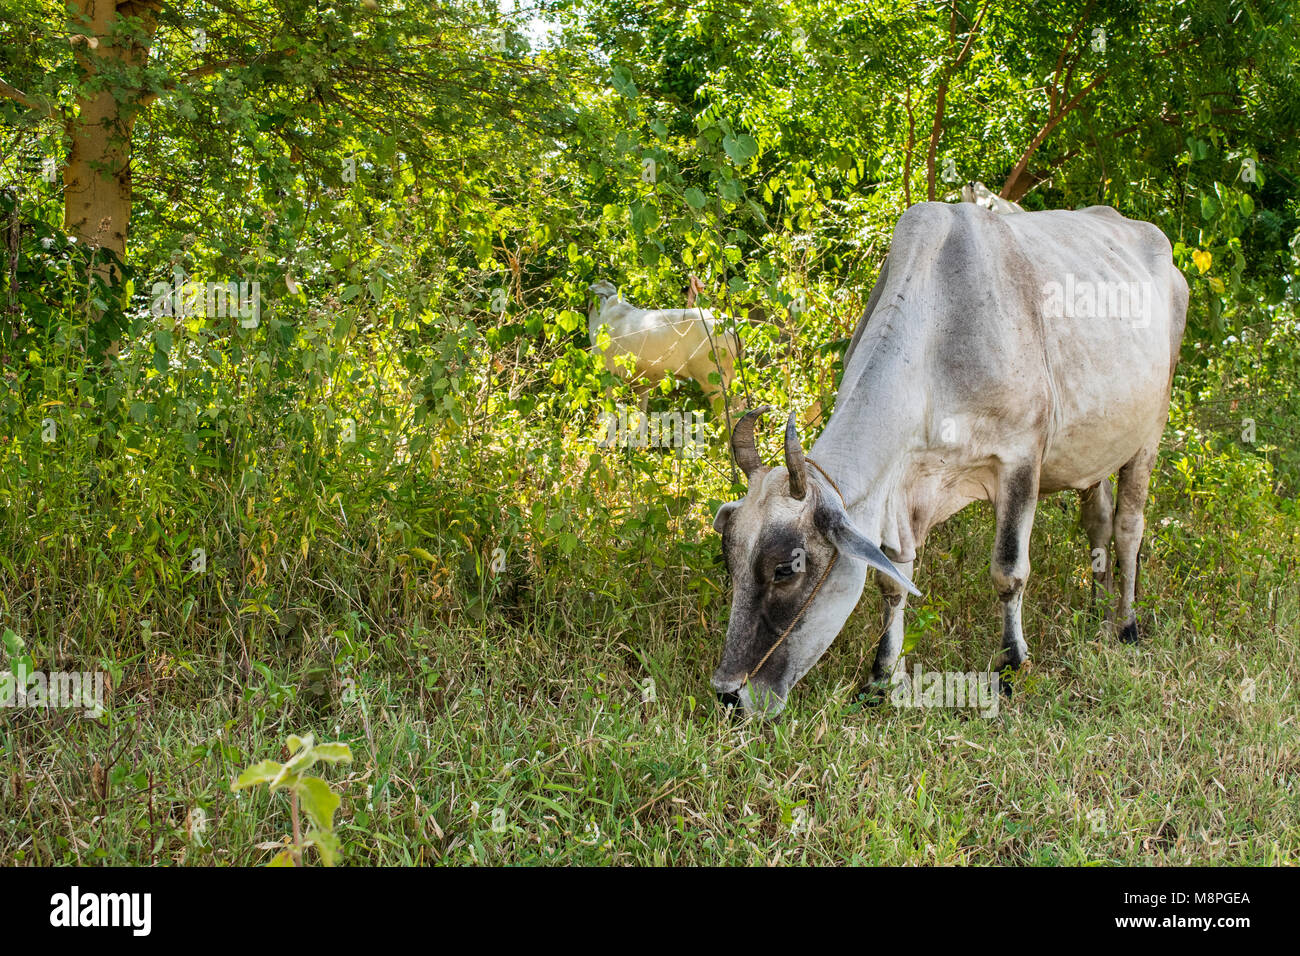 A white zebu cow feeding on grass on the side of a rural countryside road in Bagan, Myanmar, Burma, South East Asia. Burmese agriculture livestock Stock Photo